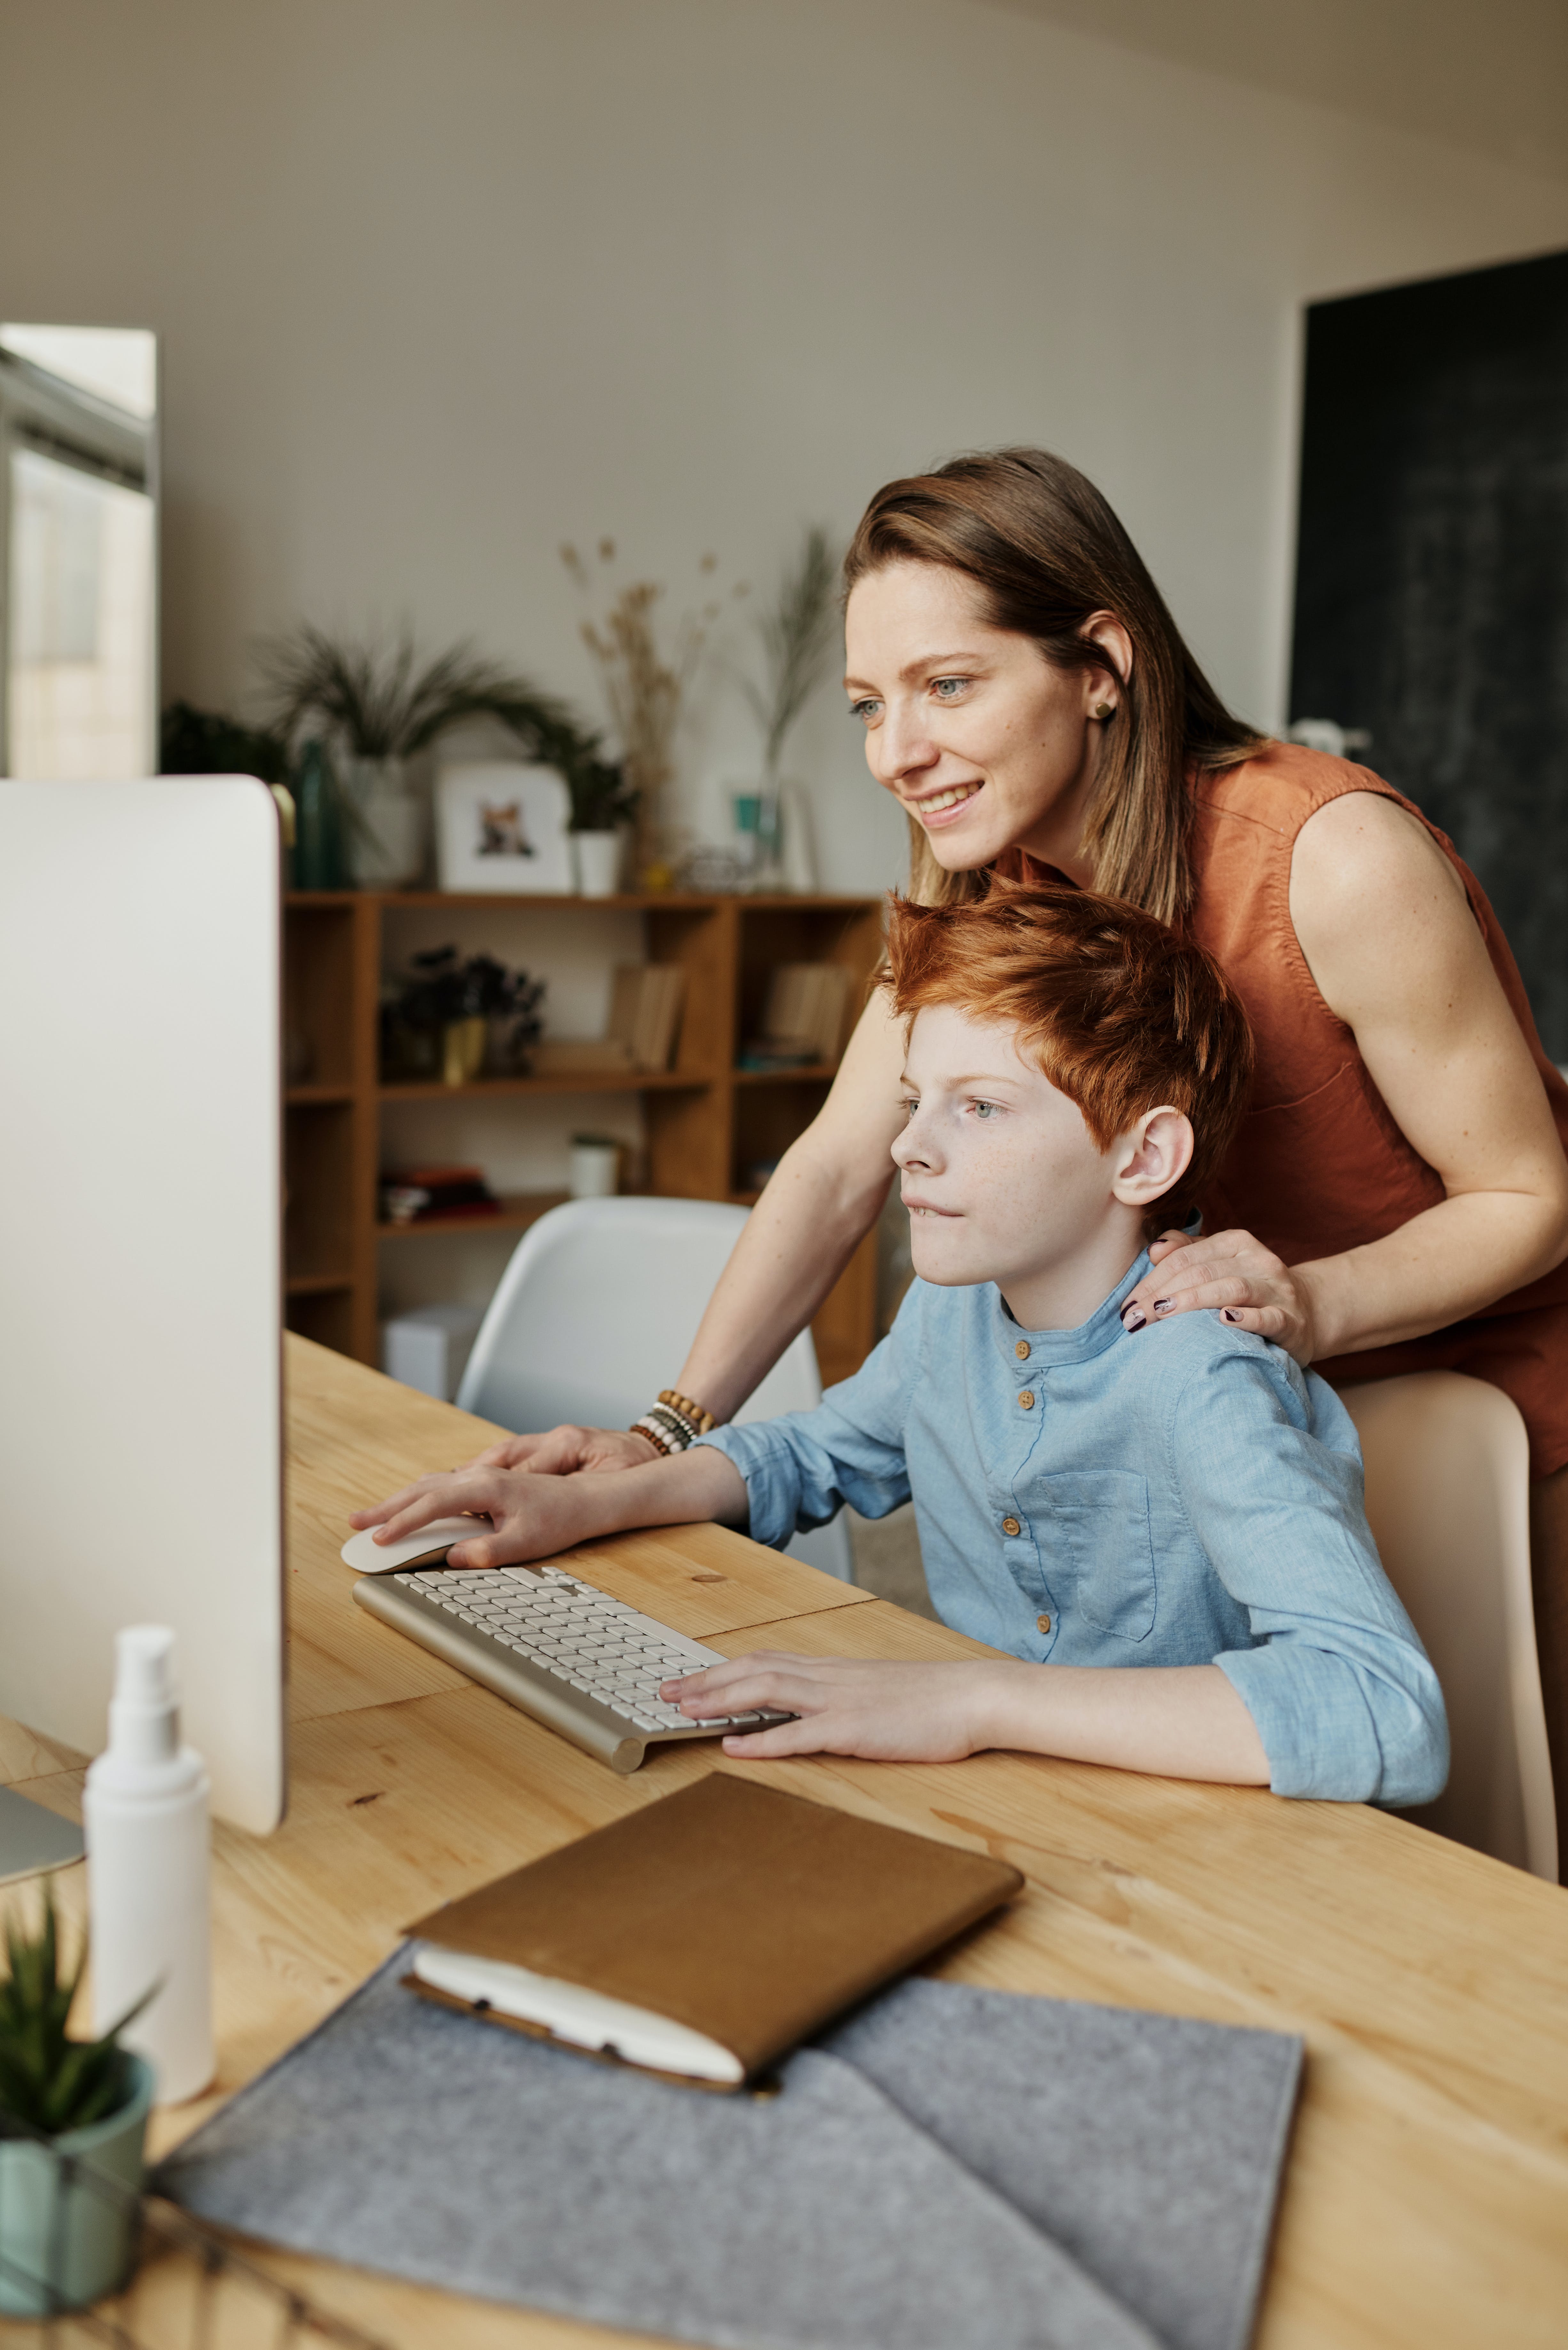 A woman bonding with a boy while using a personal computer | Source: Pexels